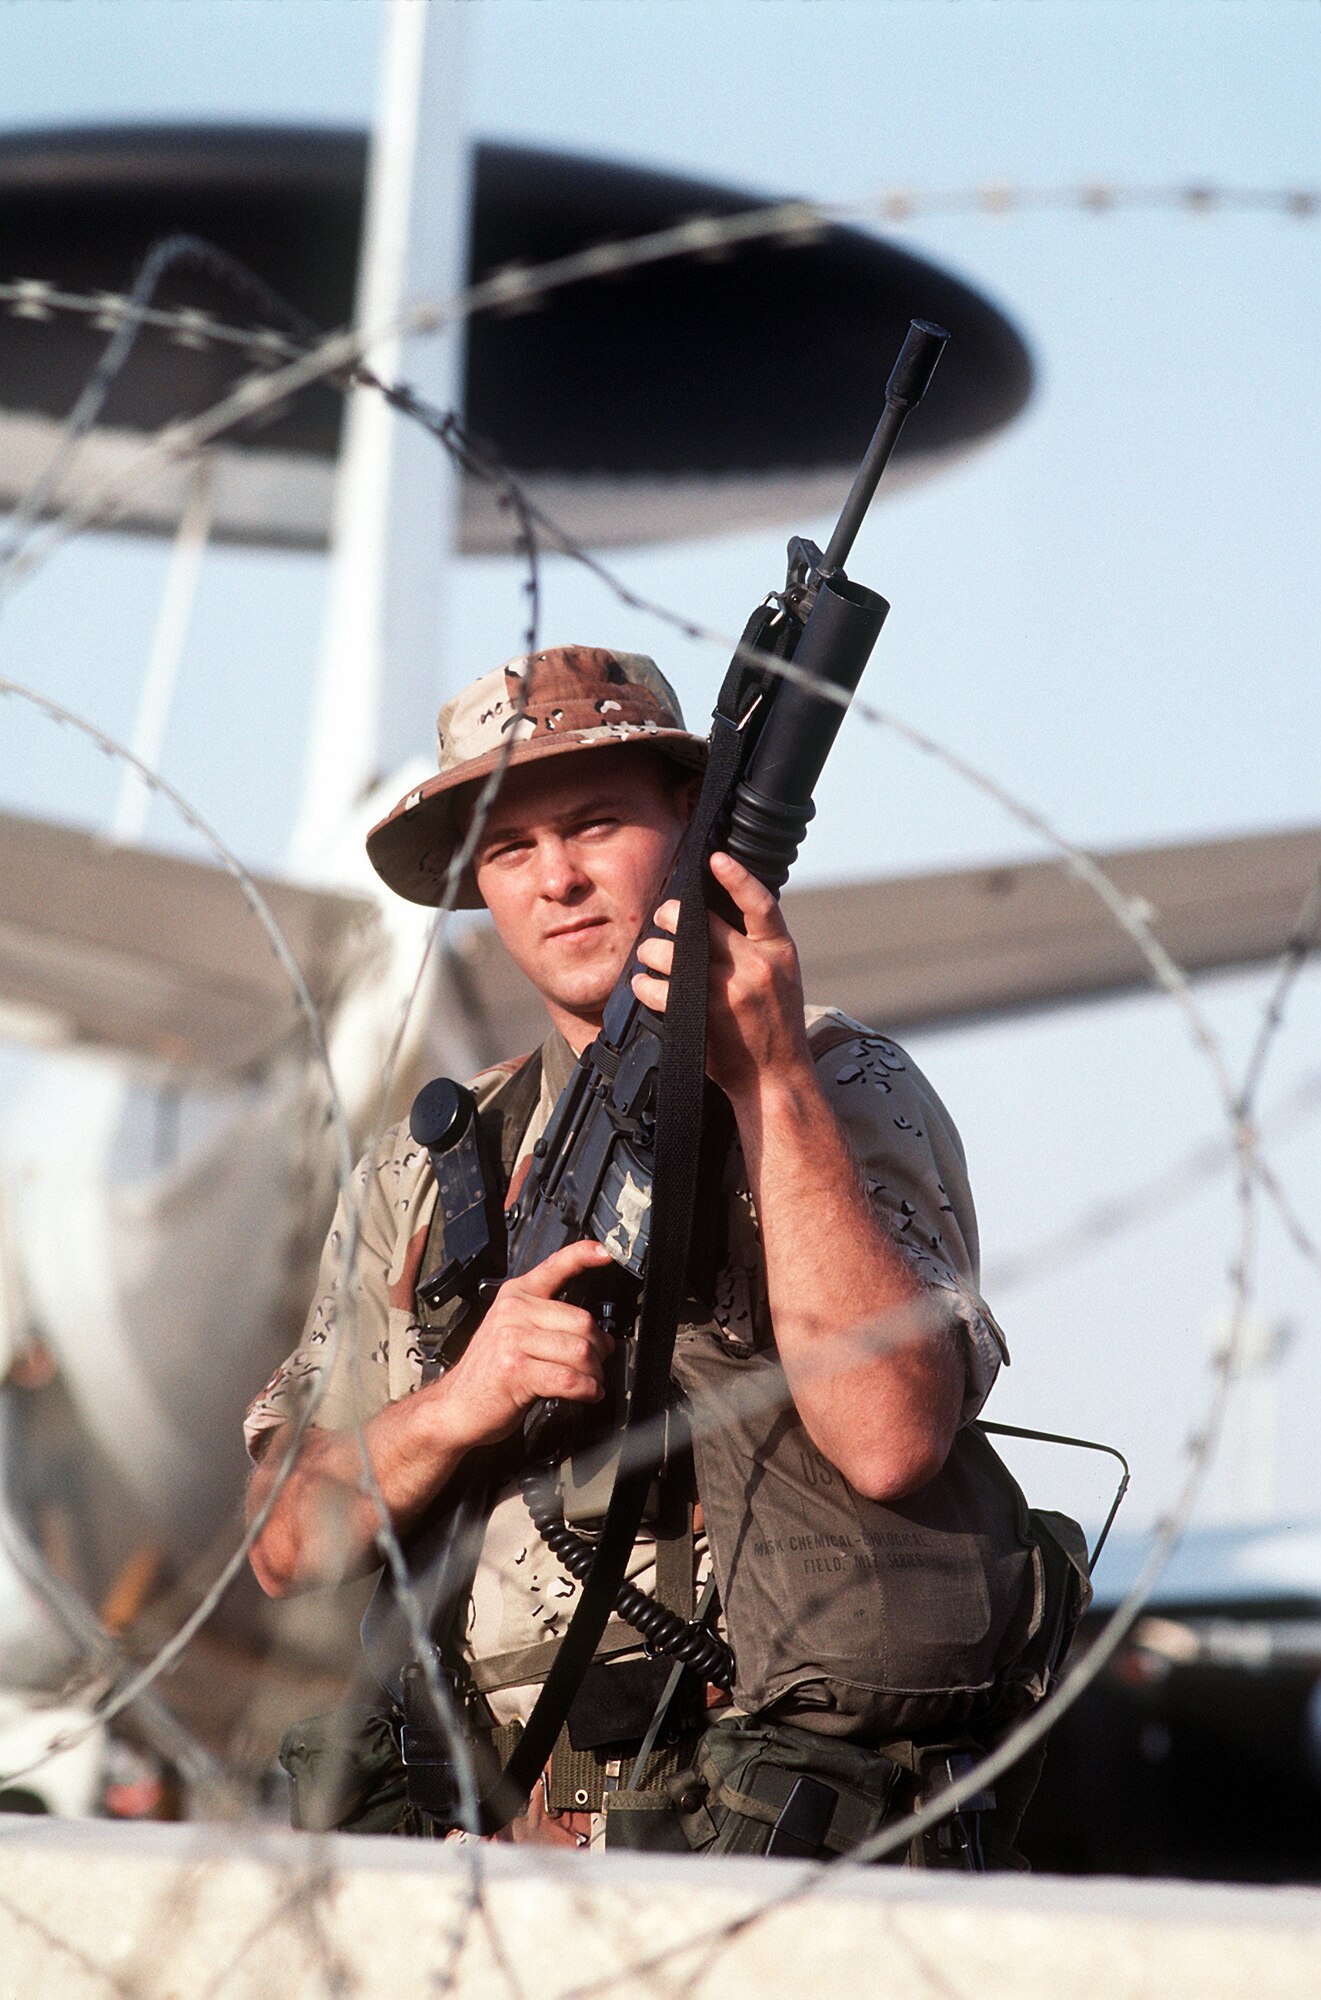 Airman 1st Class Robert Mott of the 90th Security Police Group stands guard near an E-3A Sentry aircraft during Operation Desert Shield, which led up to Desert Storm. Airman Mott is armed with an M-16A1 rifle equipped with an M-203 grenade launcher. The E-3 was the first aircraft deployed in the Desert Shield buildup. When combat activities began, nearly half of all E-3s were in the air as part of the round-the-clock coverage. (Air Force photo/Released)